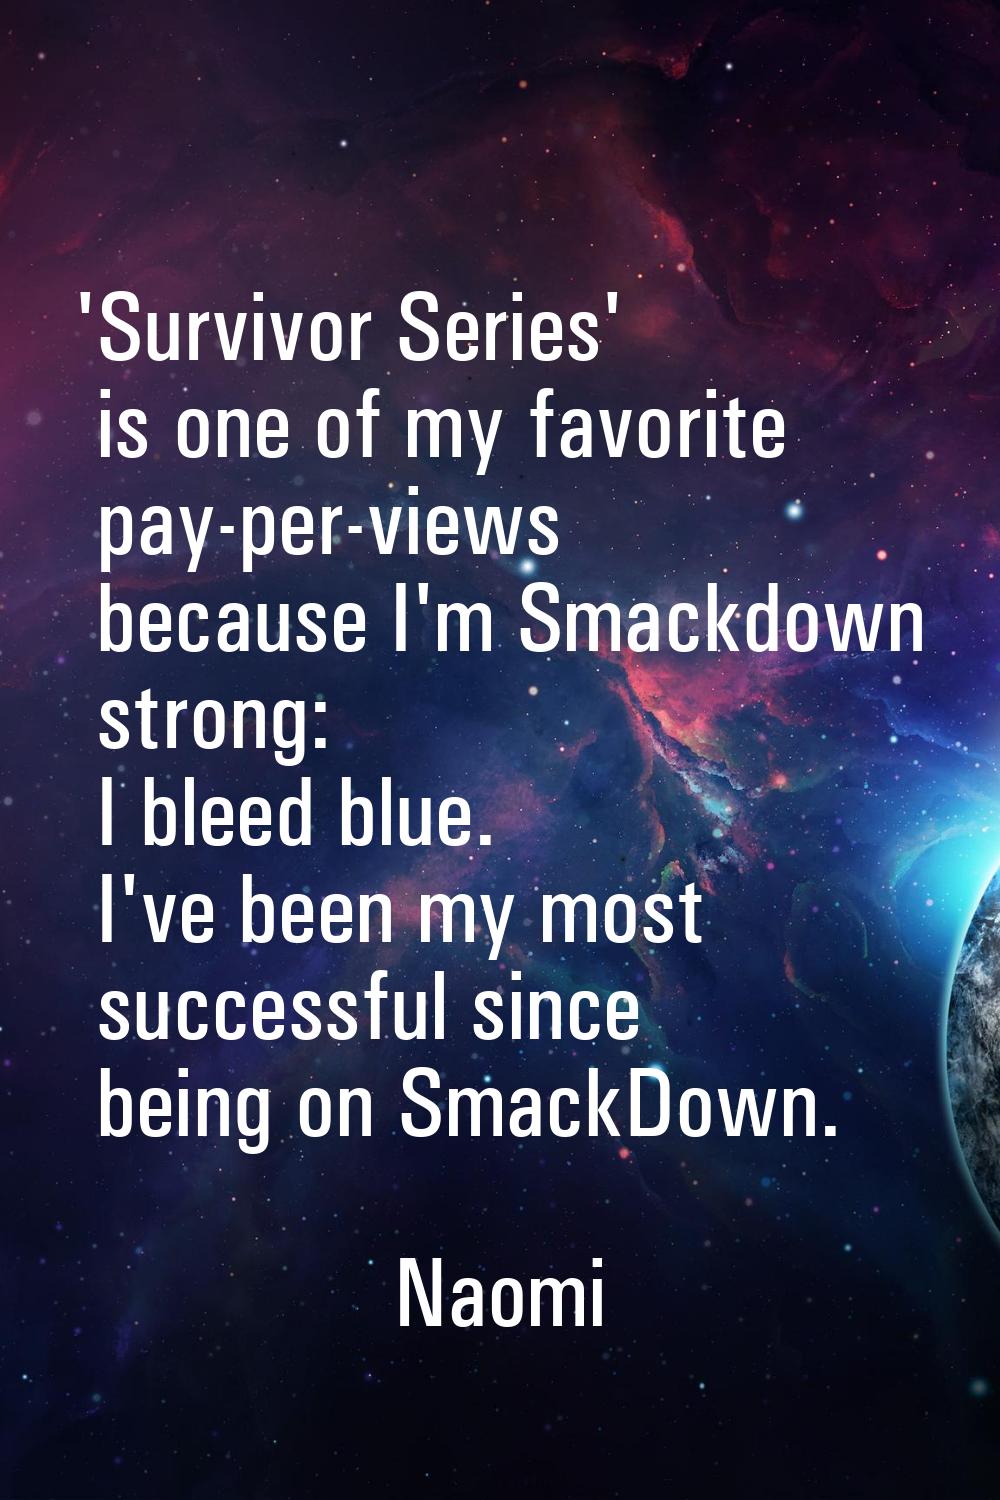 'Survivor Series' is one of my favorite pay-per-views because I'm Smackdown strong: I bleed blue. I